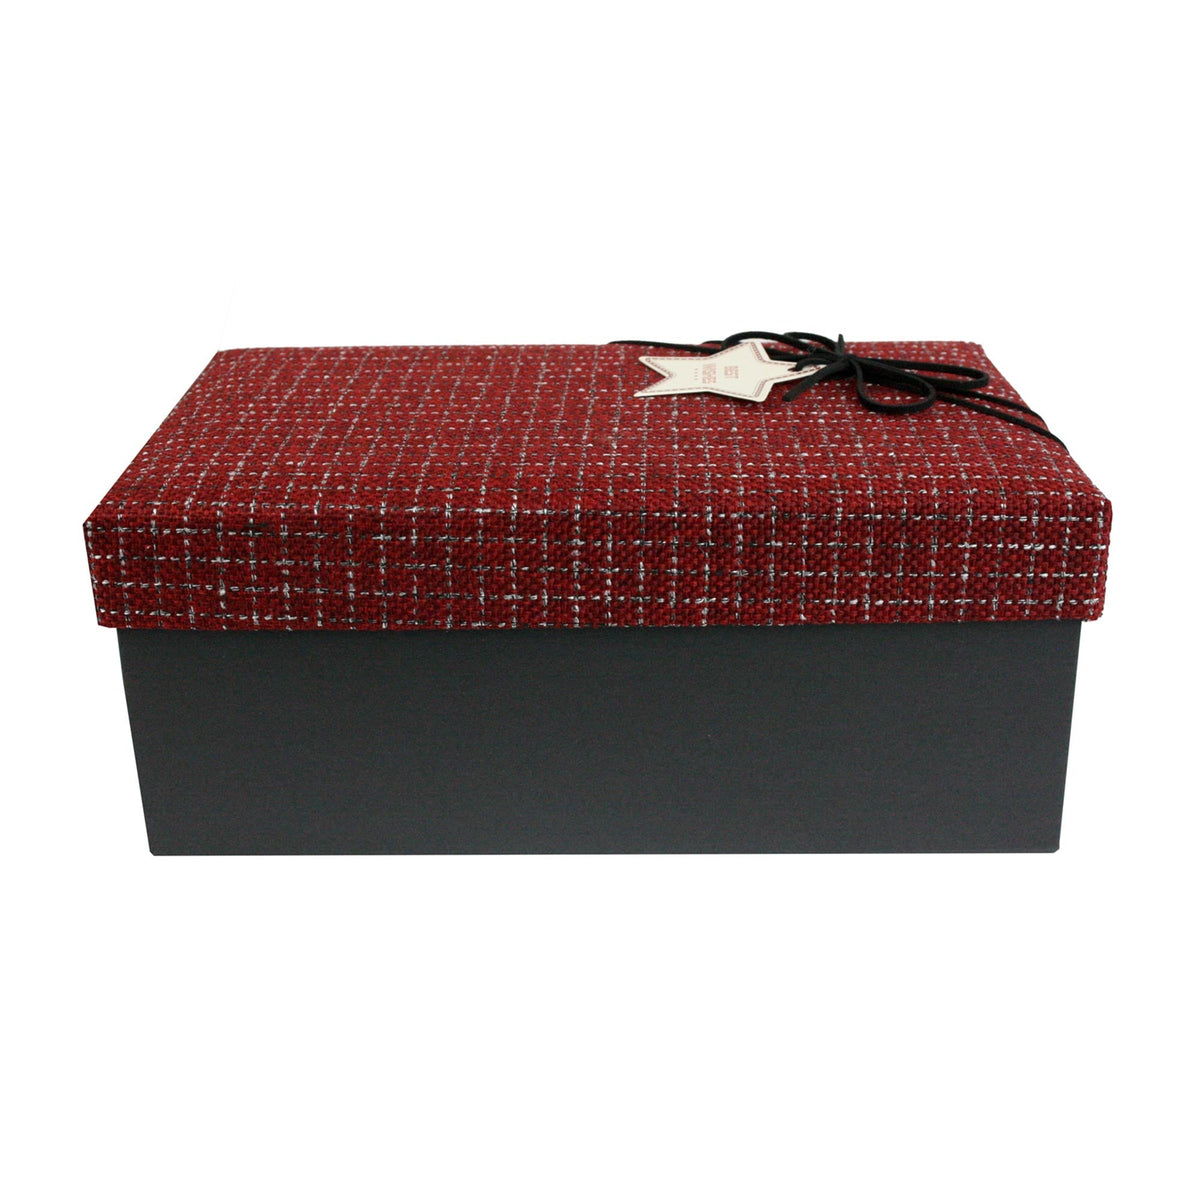 Luxury Textured Red/Black Gift Box - Single (Sizes Available)